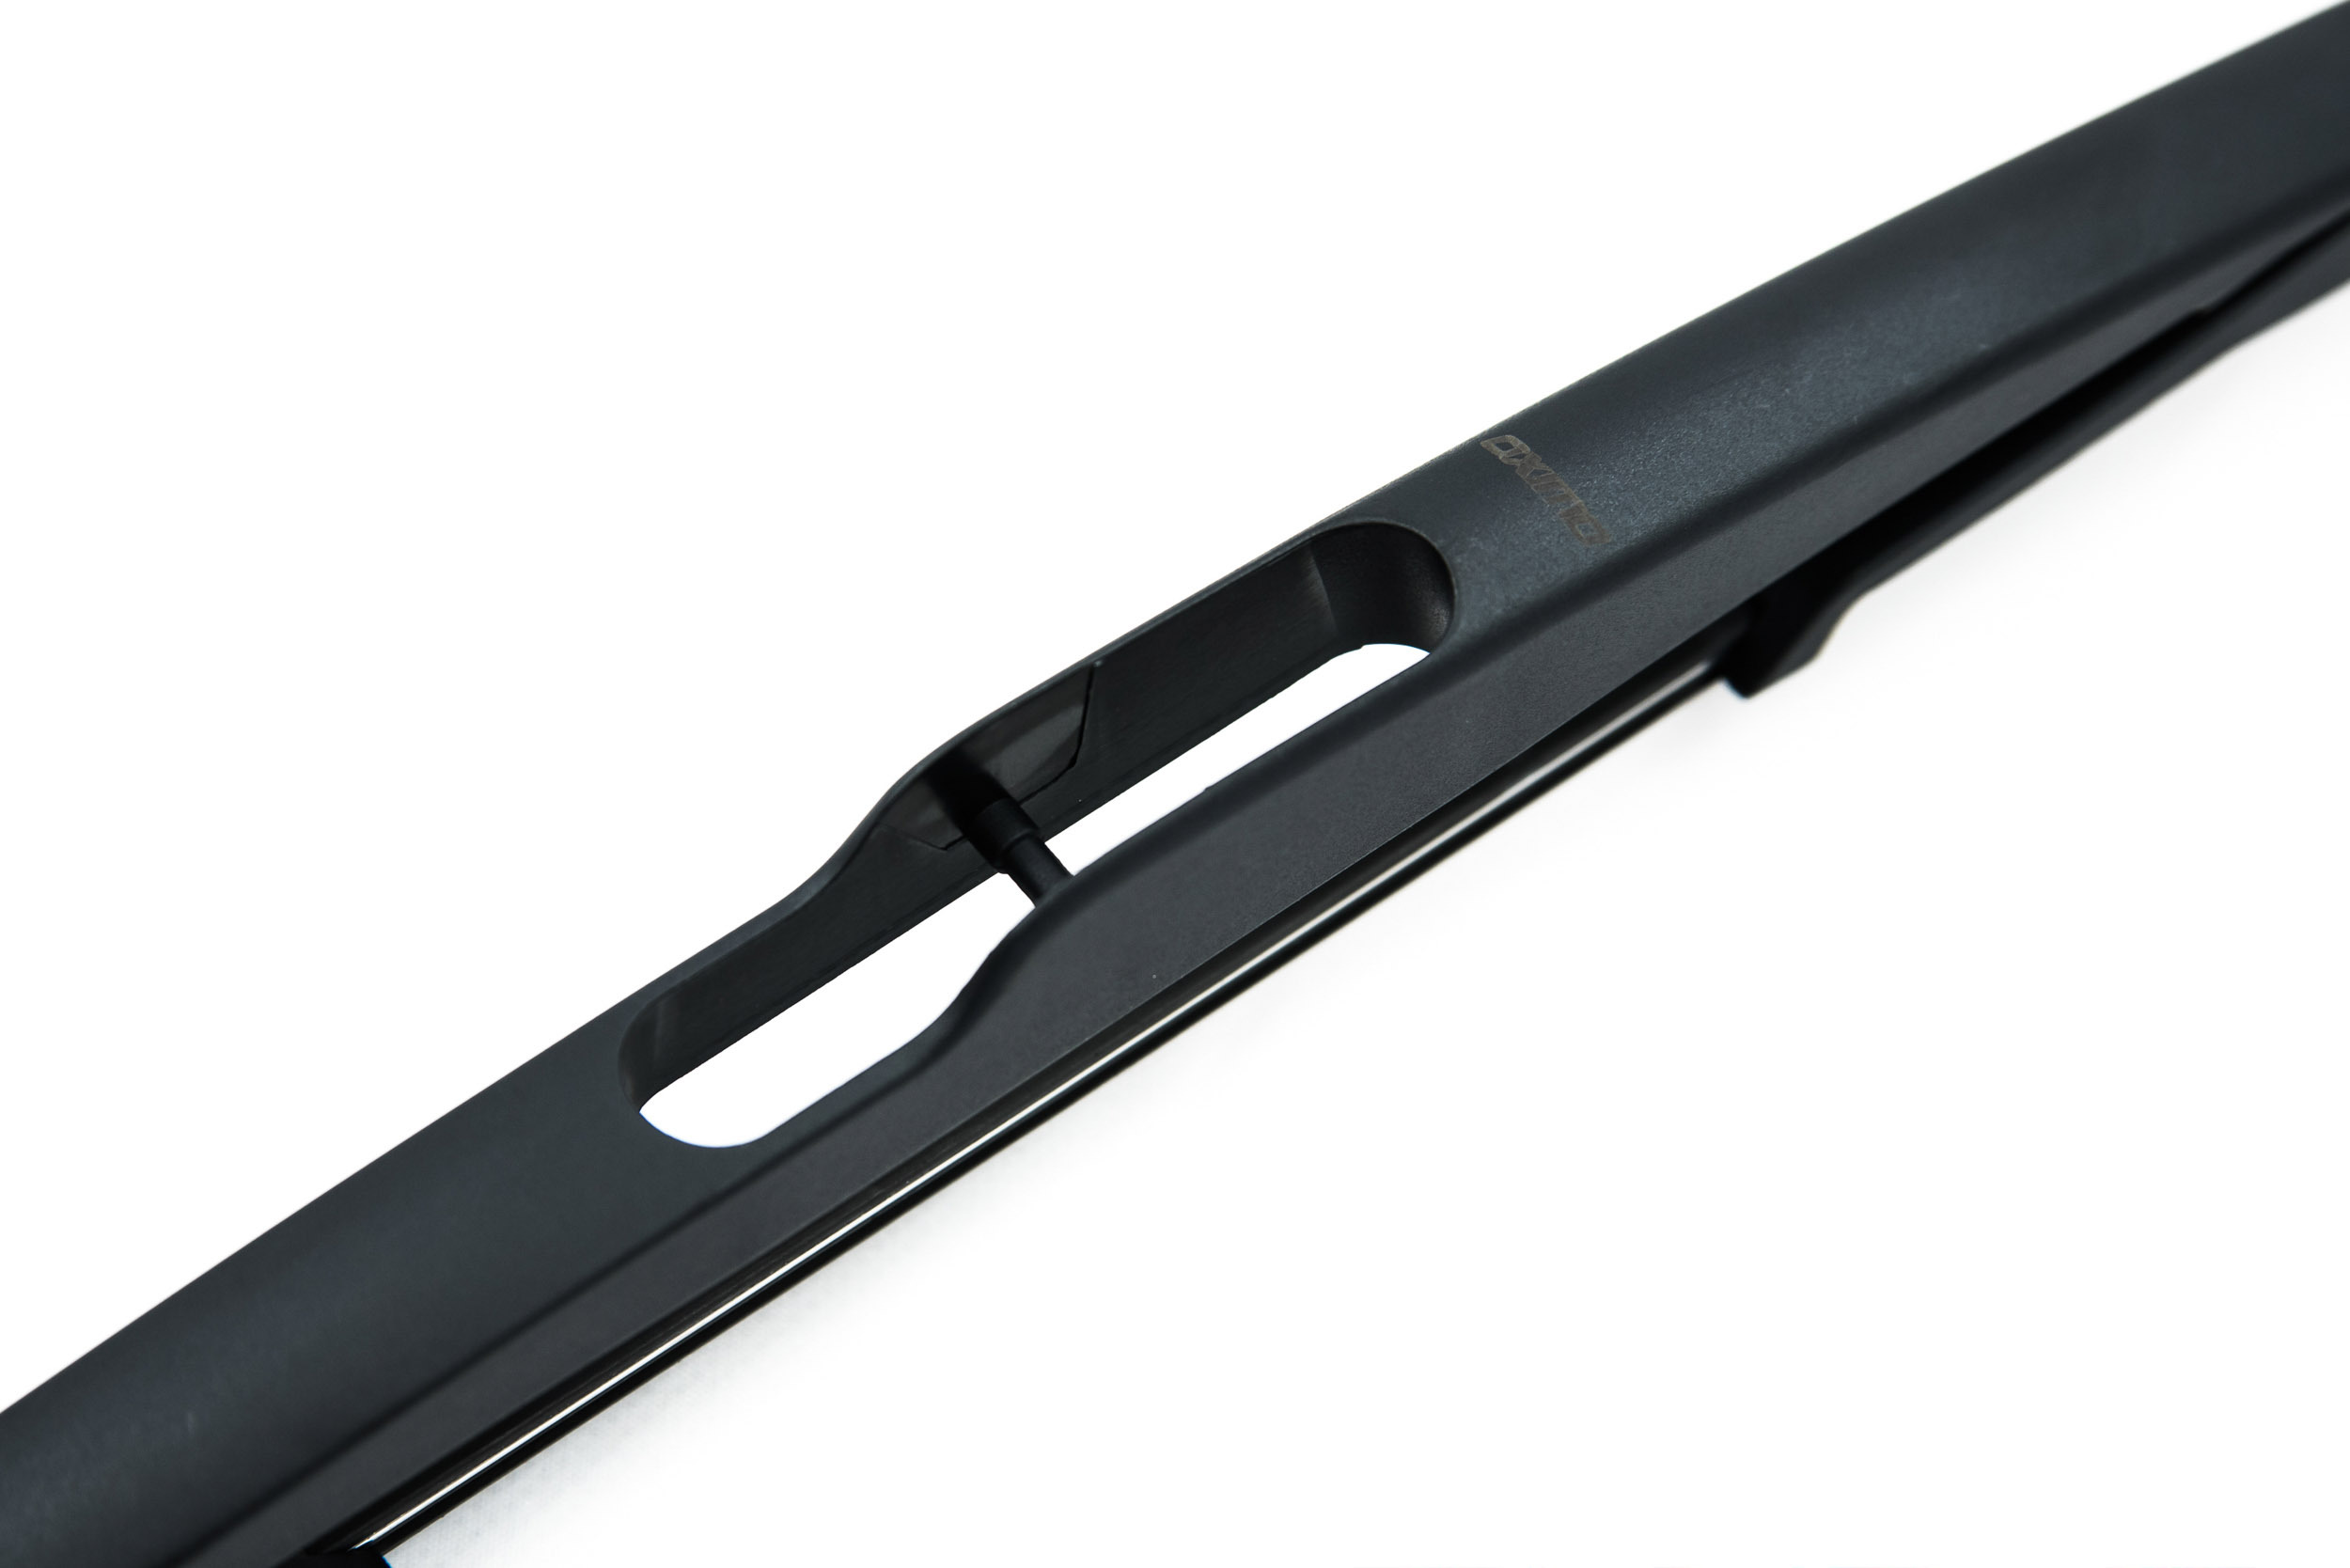 Rear dedicated silicon wiperblade 350 mm